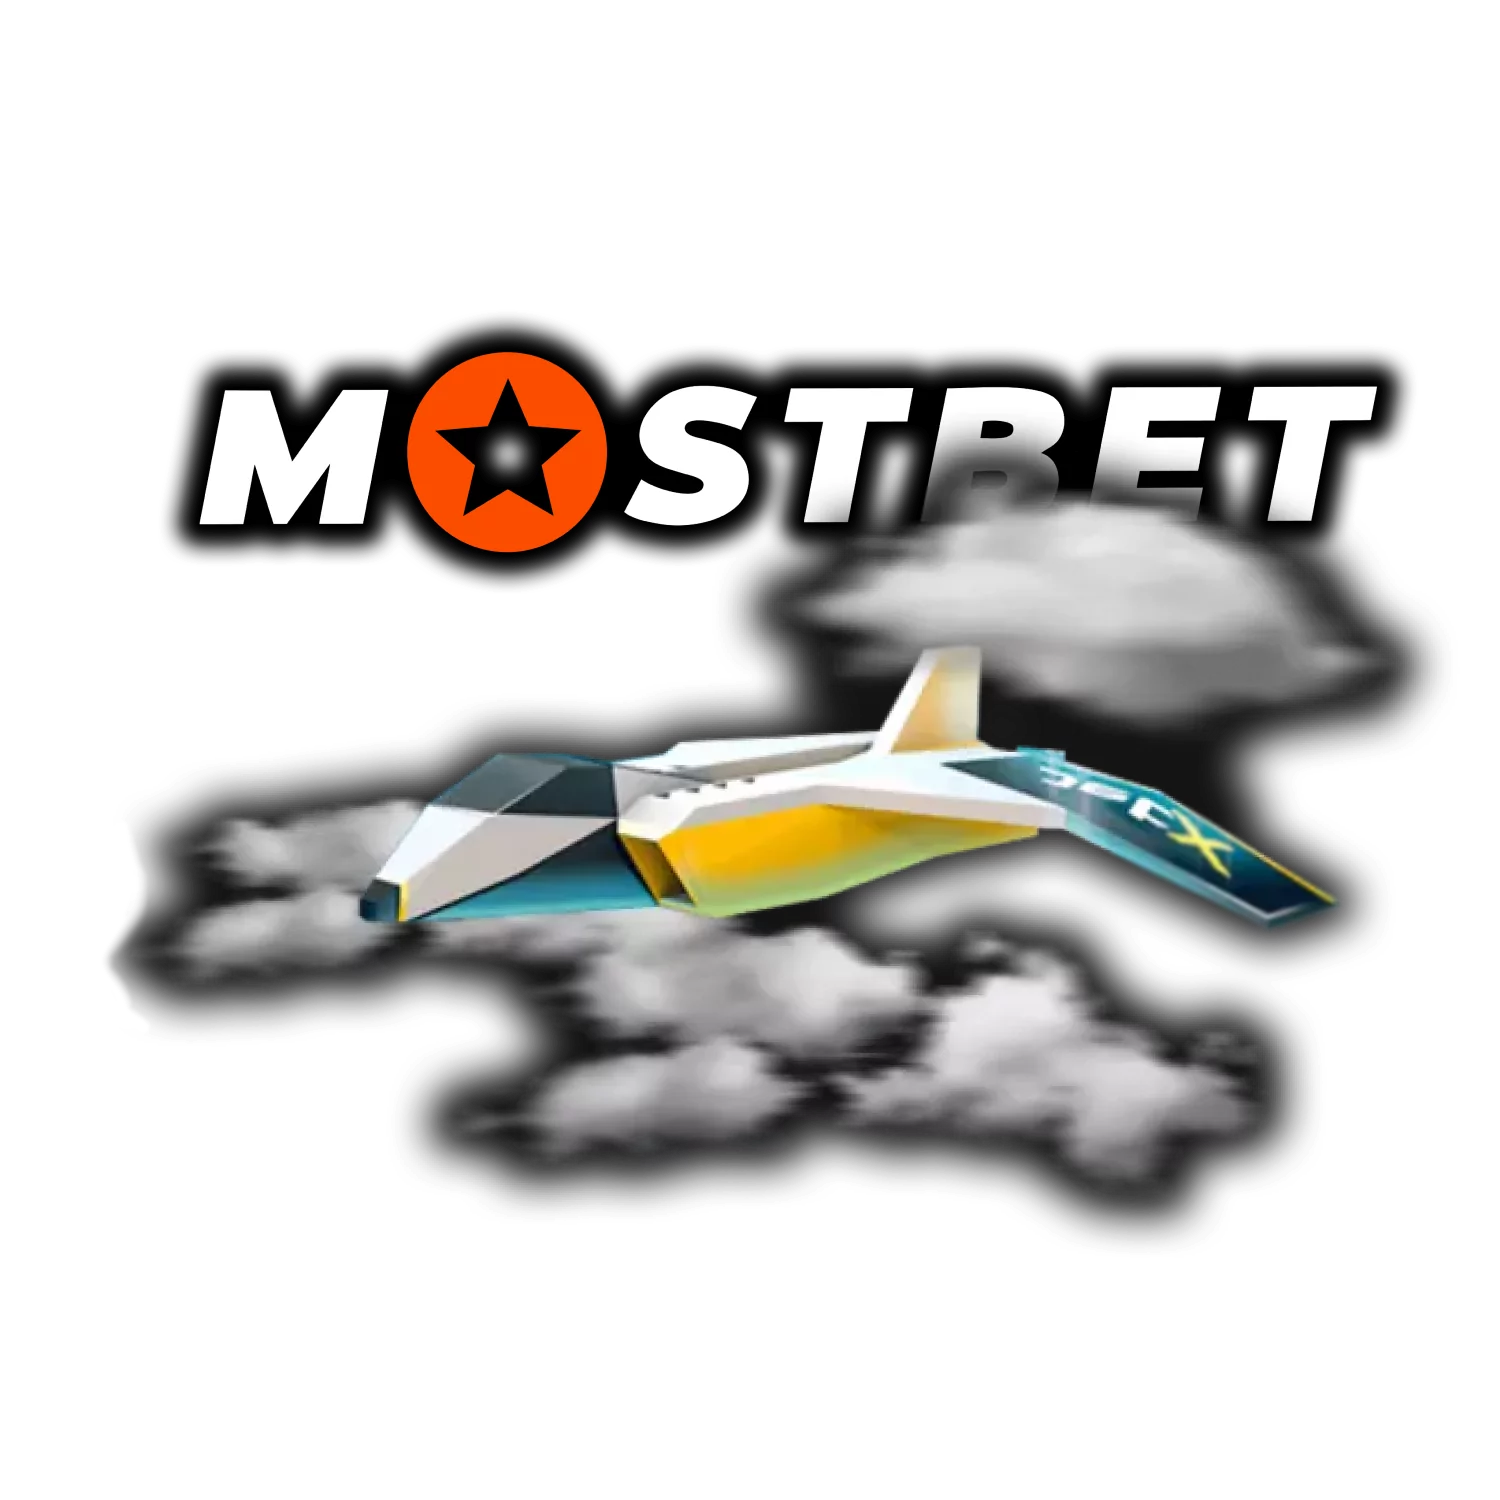 At Mostbet, play fast games and win.